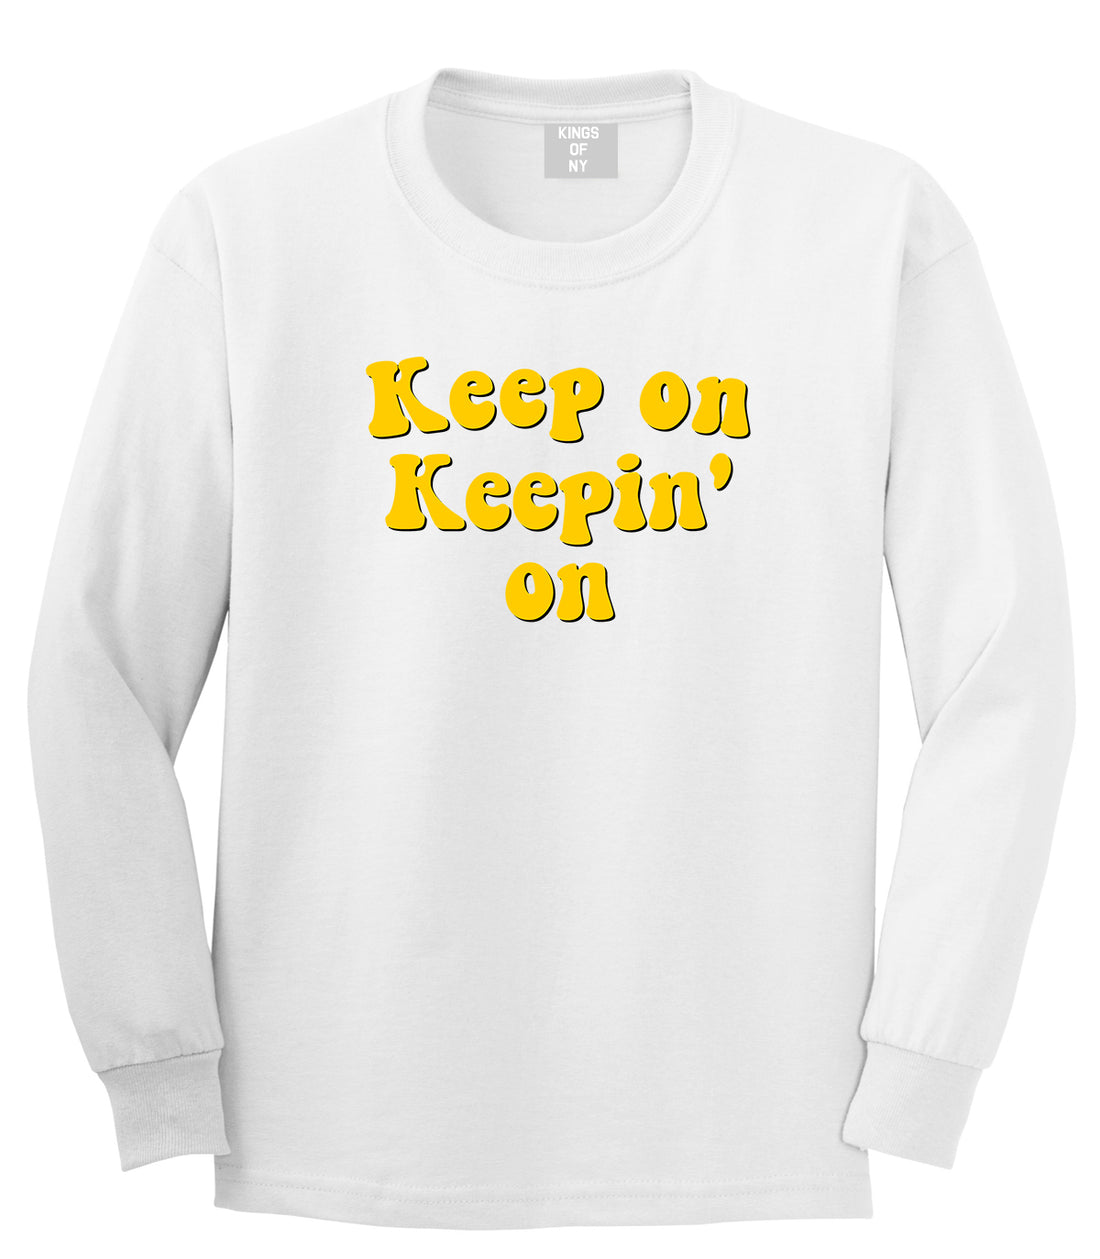 Keep On Keepin On Mens Long Sleeve T-Shirt White by Kings Of NY